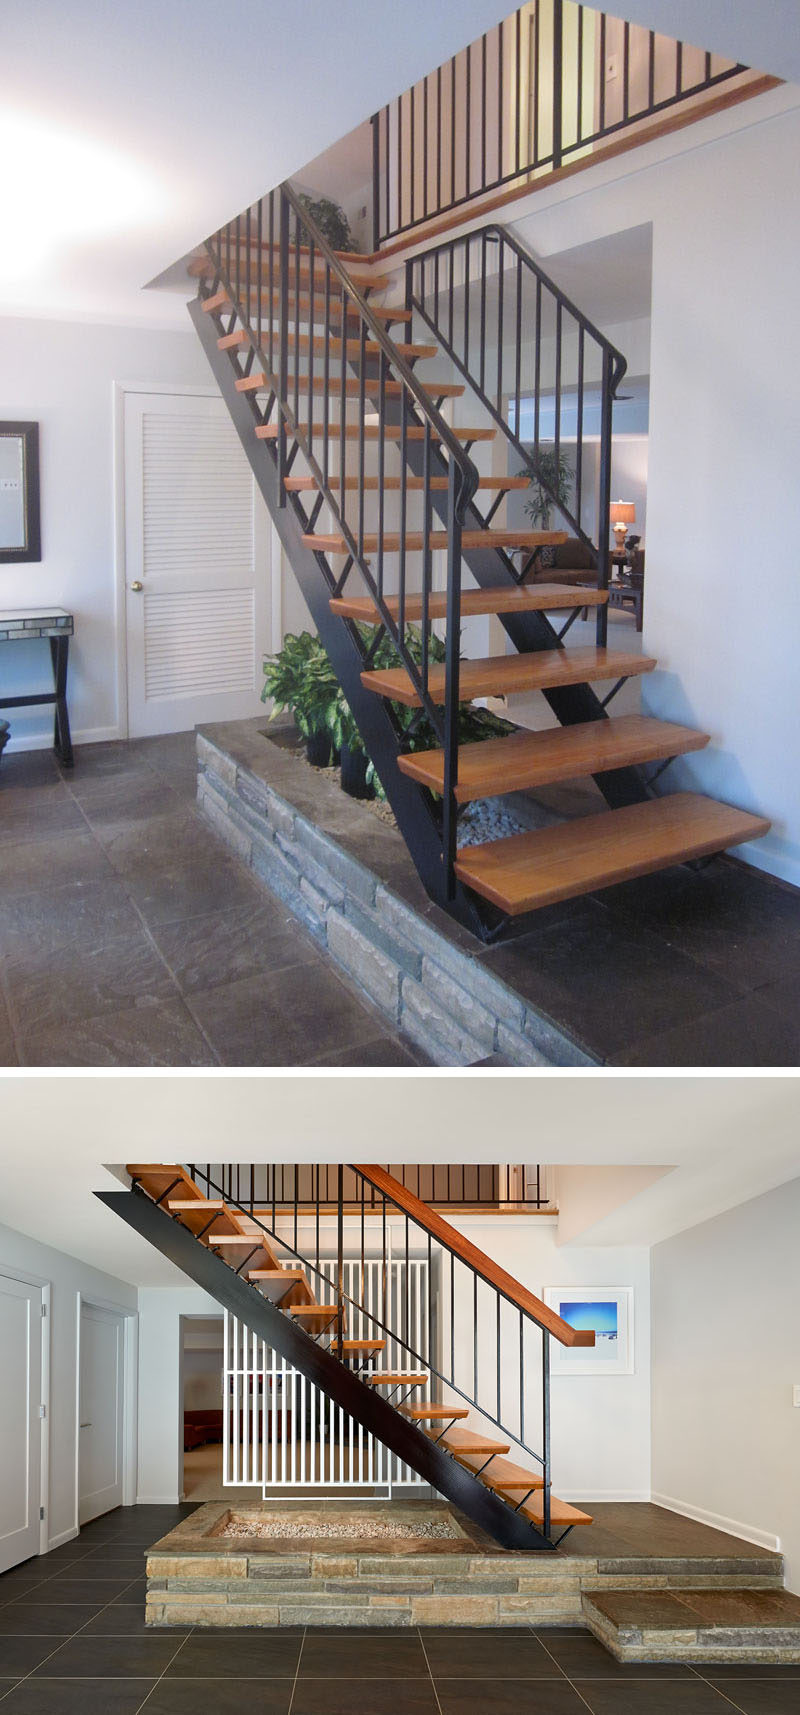 BEFORE & AFTER - This staircase leading to the second floor of the home is an example of mid-century craftsmanship. Dark grey tile was added to accent the staircase's style. The original treads and railing were left, and the handrail was replaced with the wood cap that the client requested for a more authentic finish.